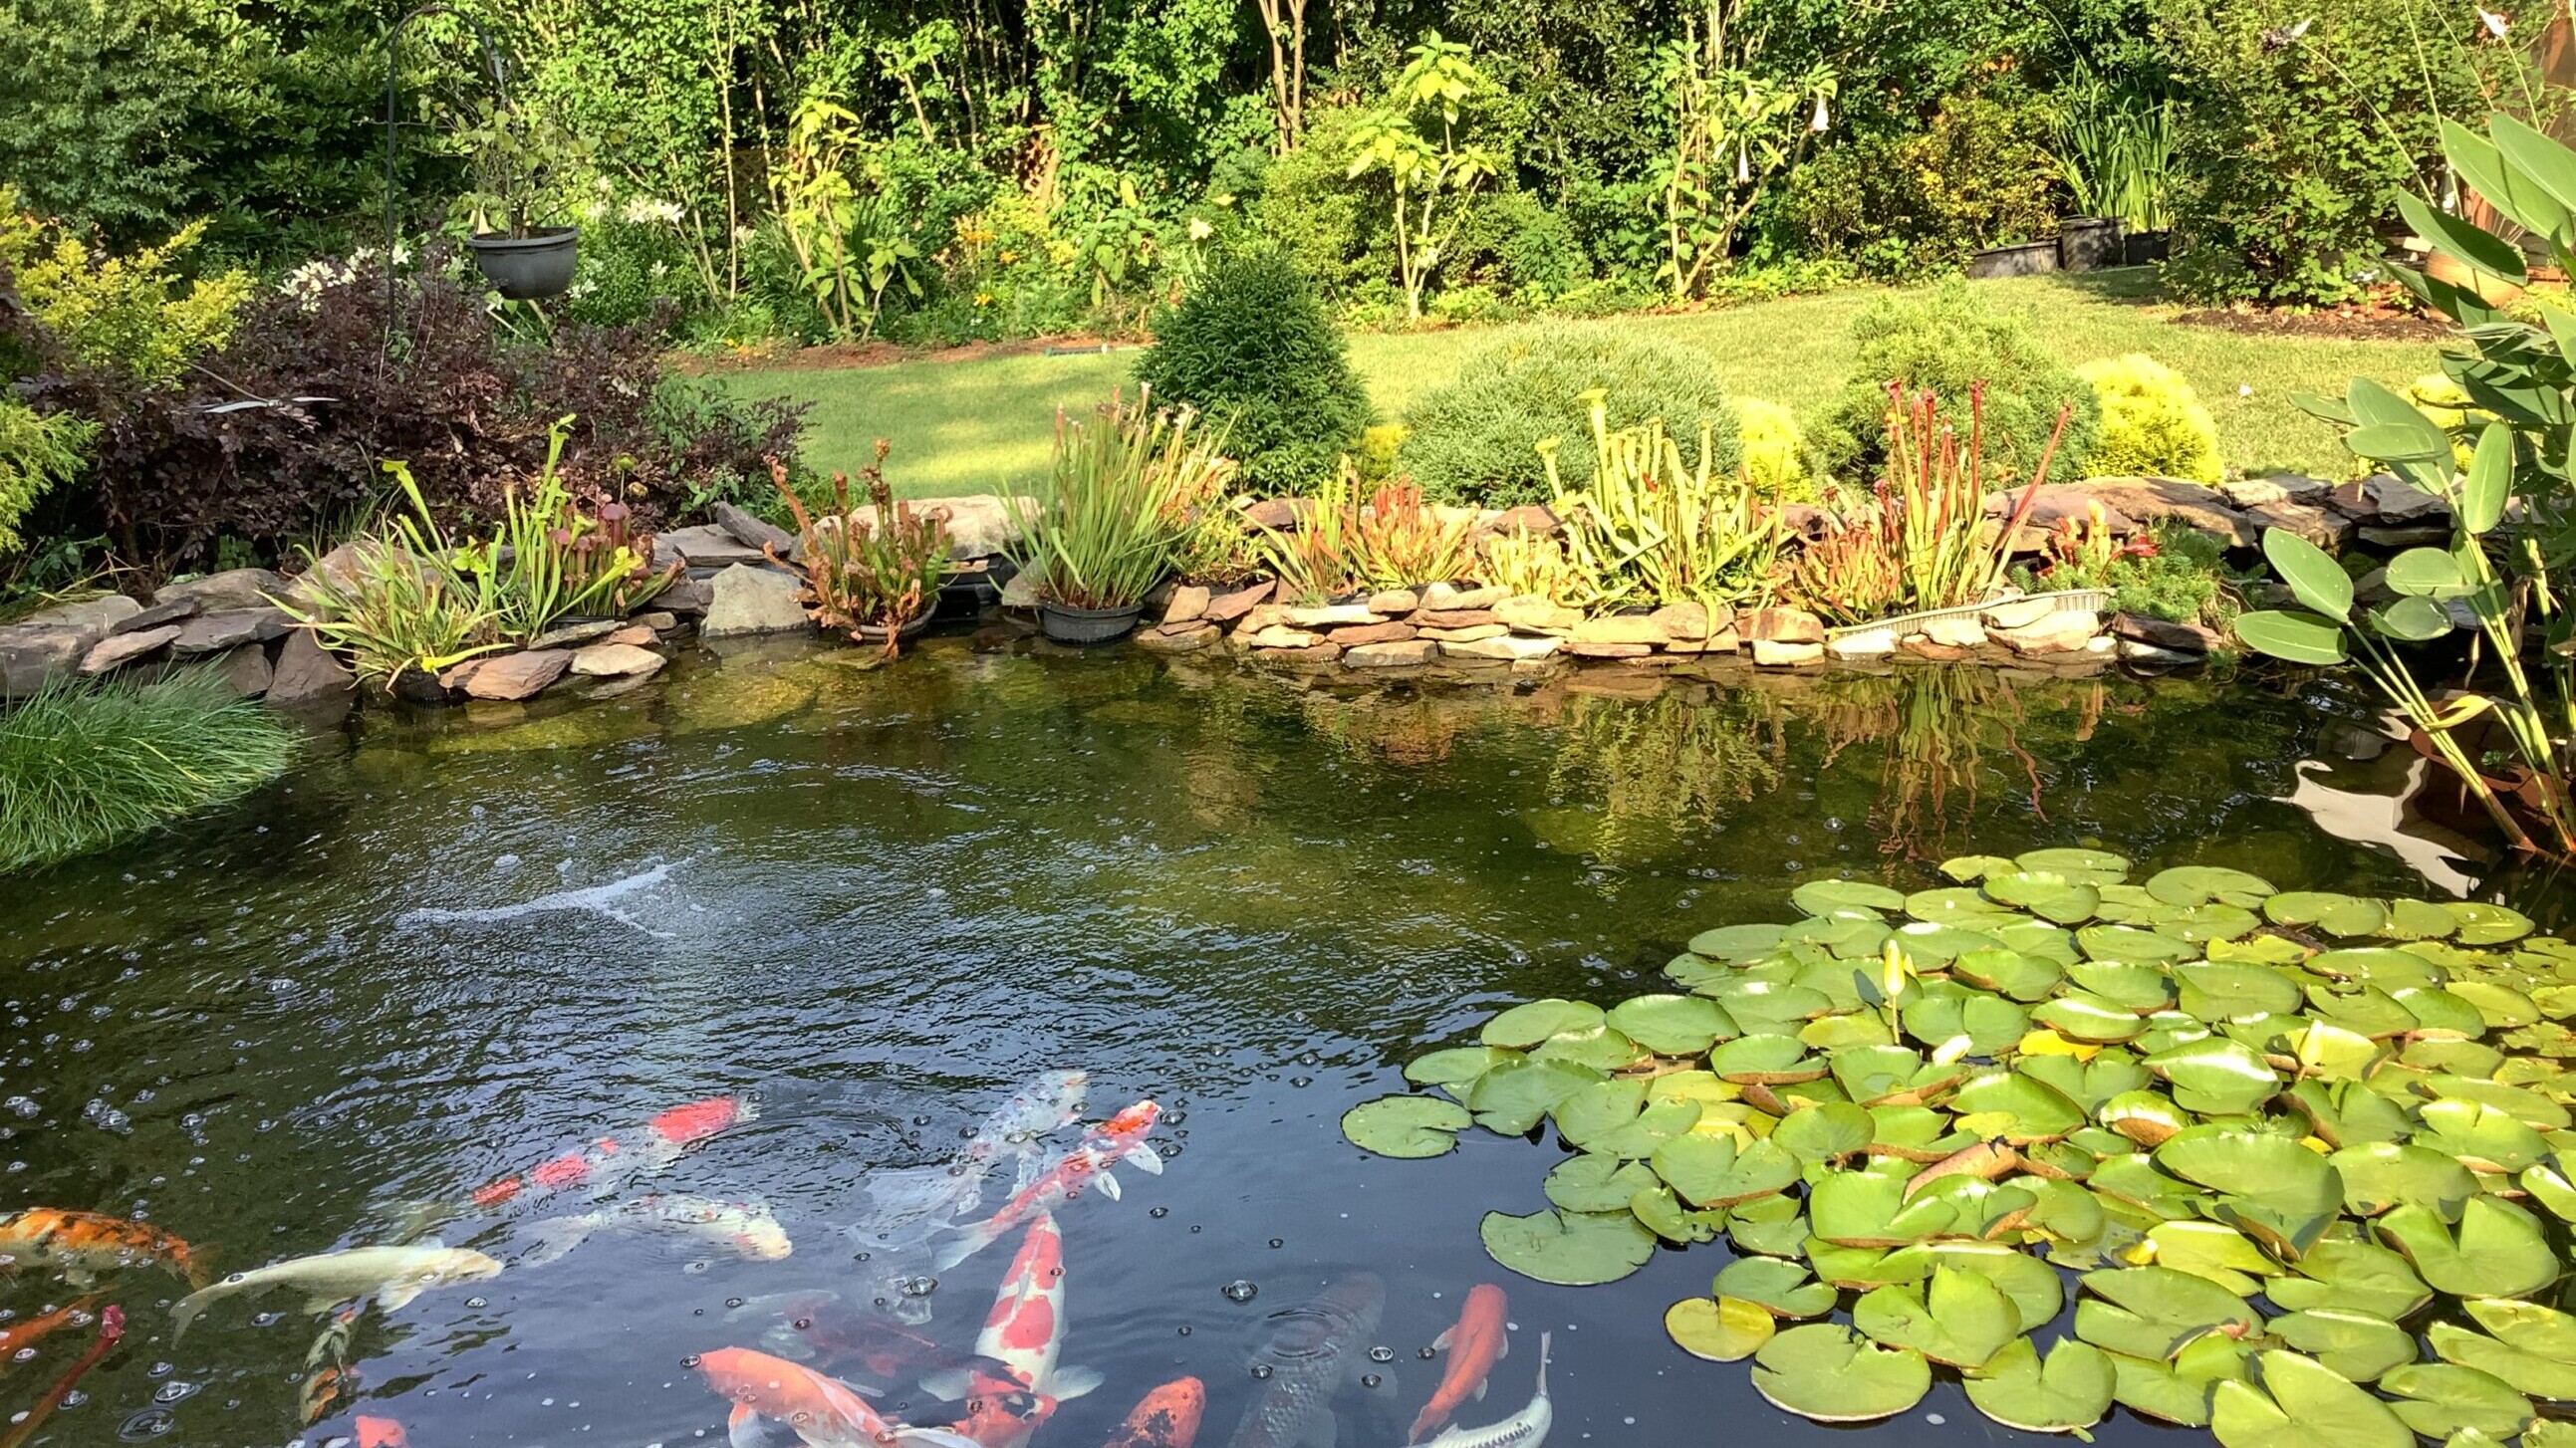 A pond with many fish swimming in it